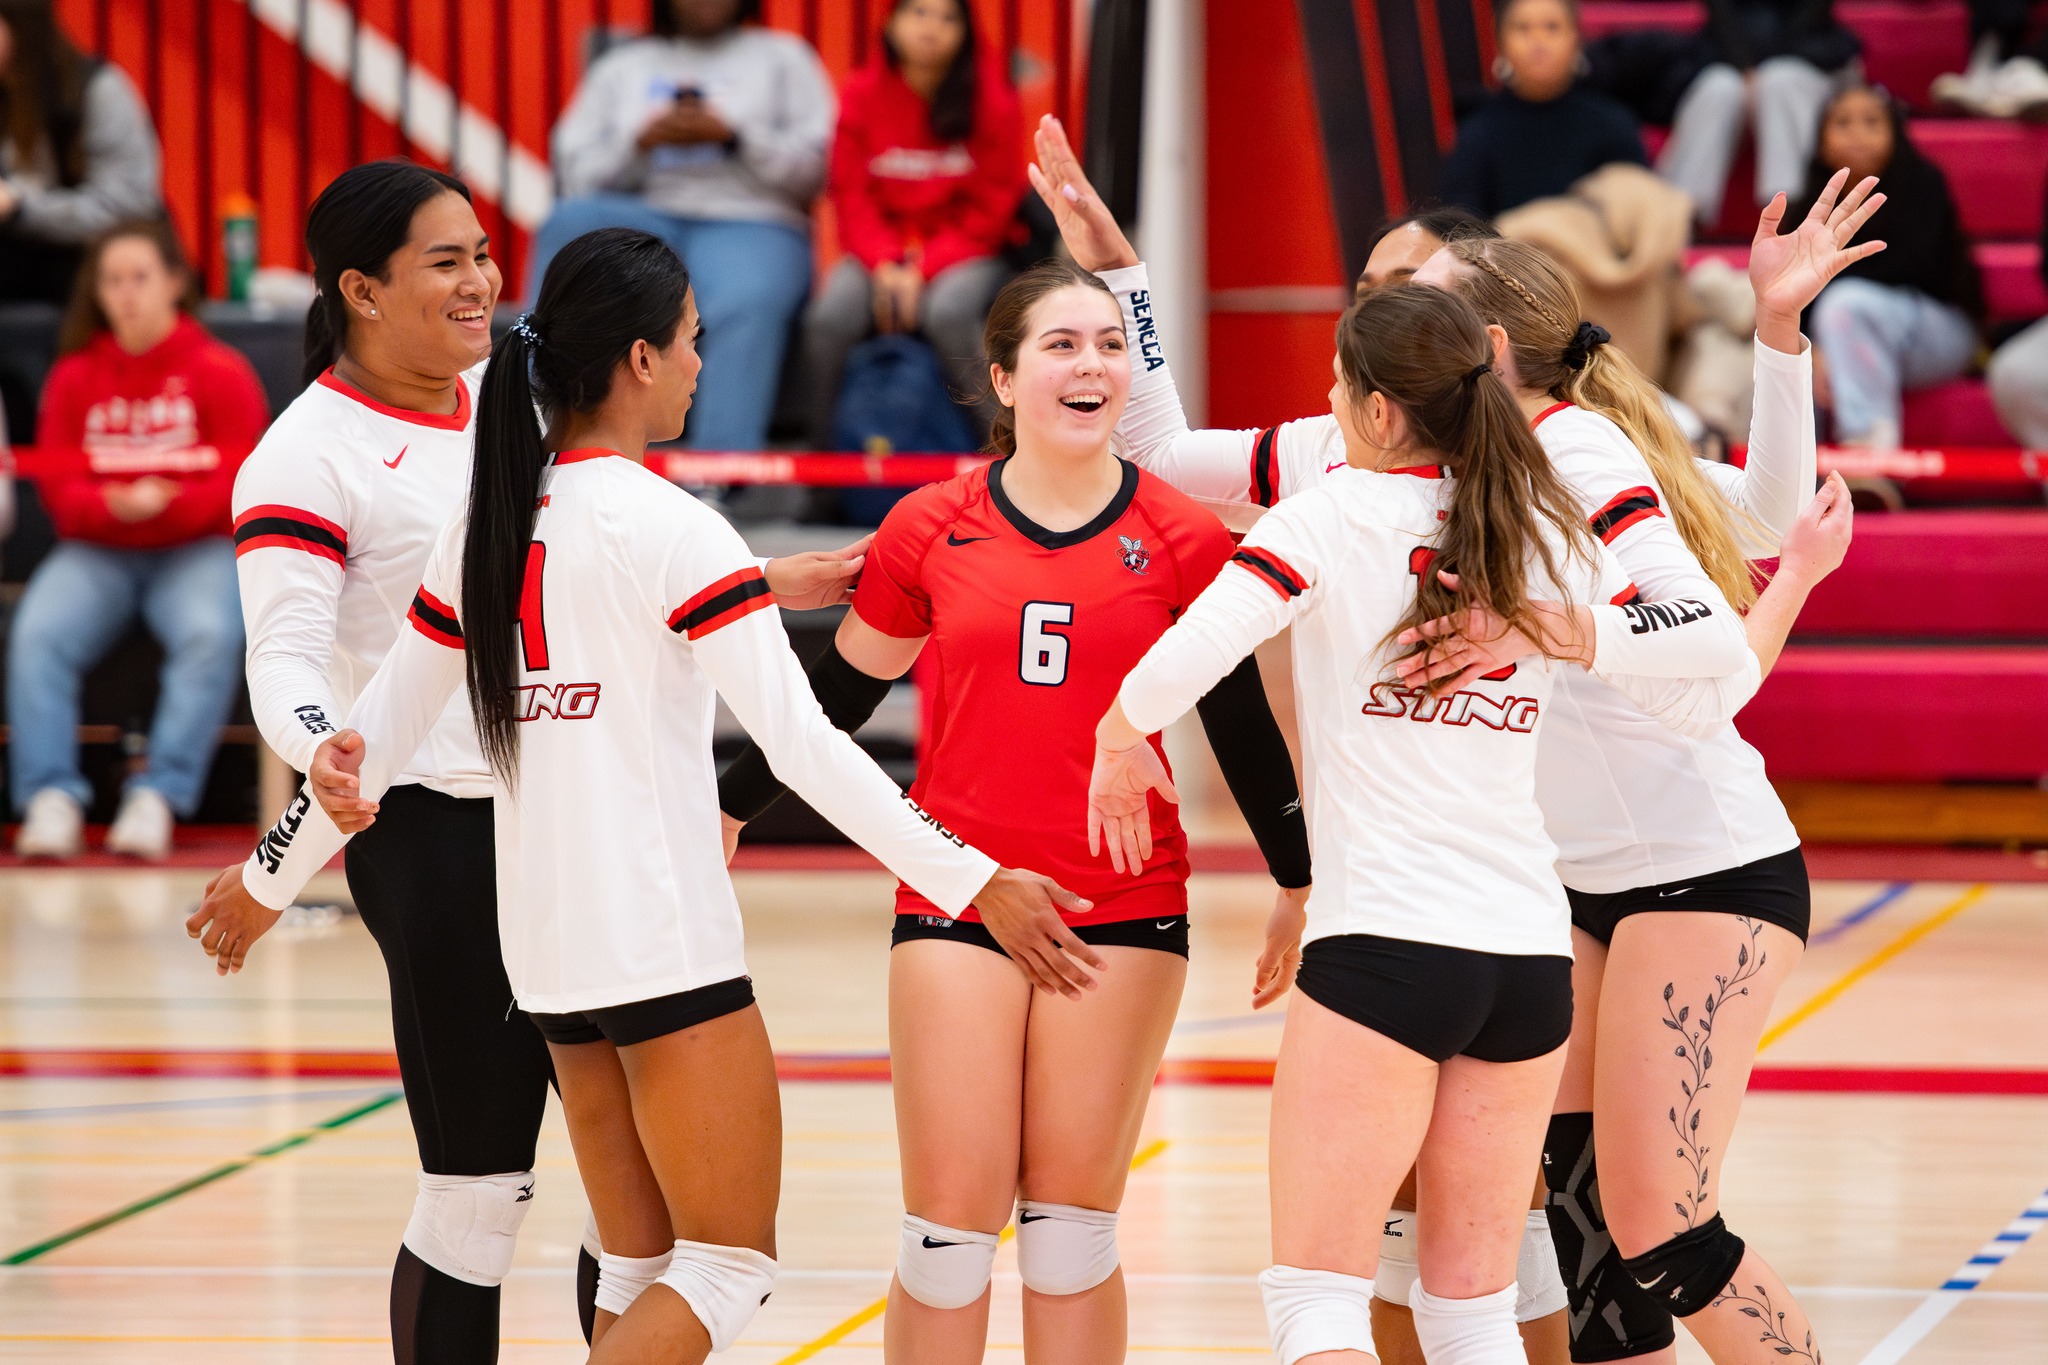 Women's Volleyball hosts a crossover game this Saturday